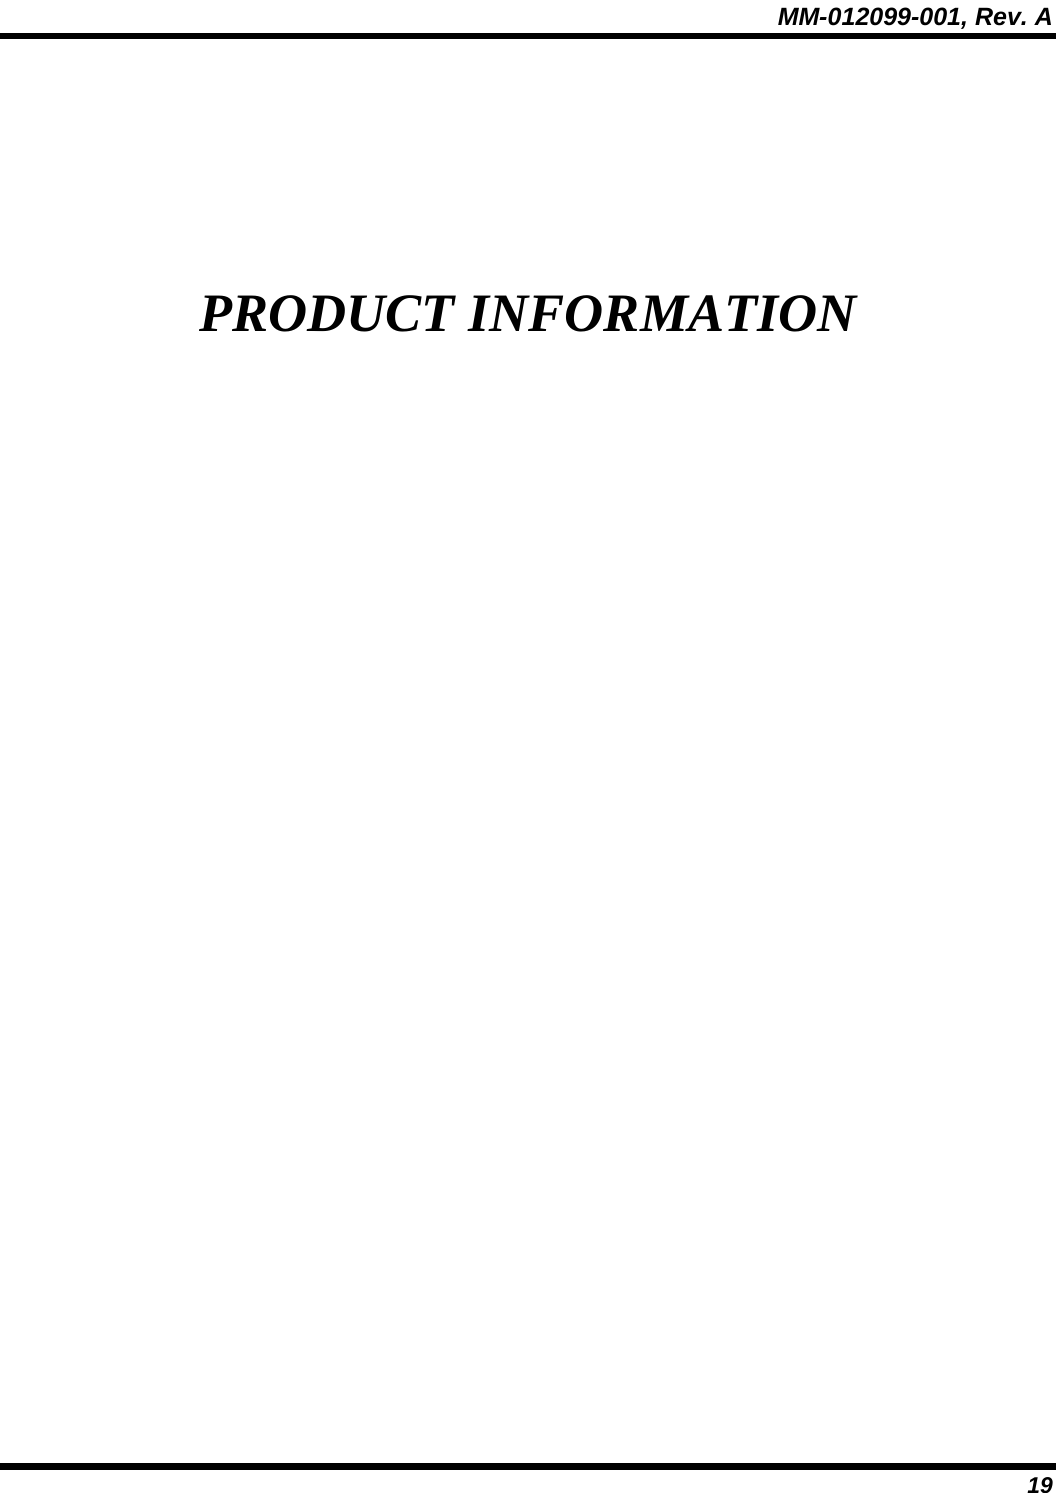 MM-012099-001, Rev. A 19 PRODUCT INFORMATION 